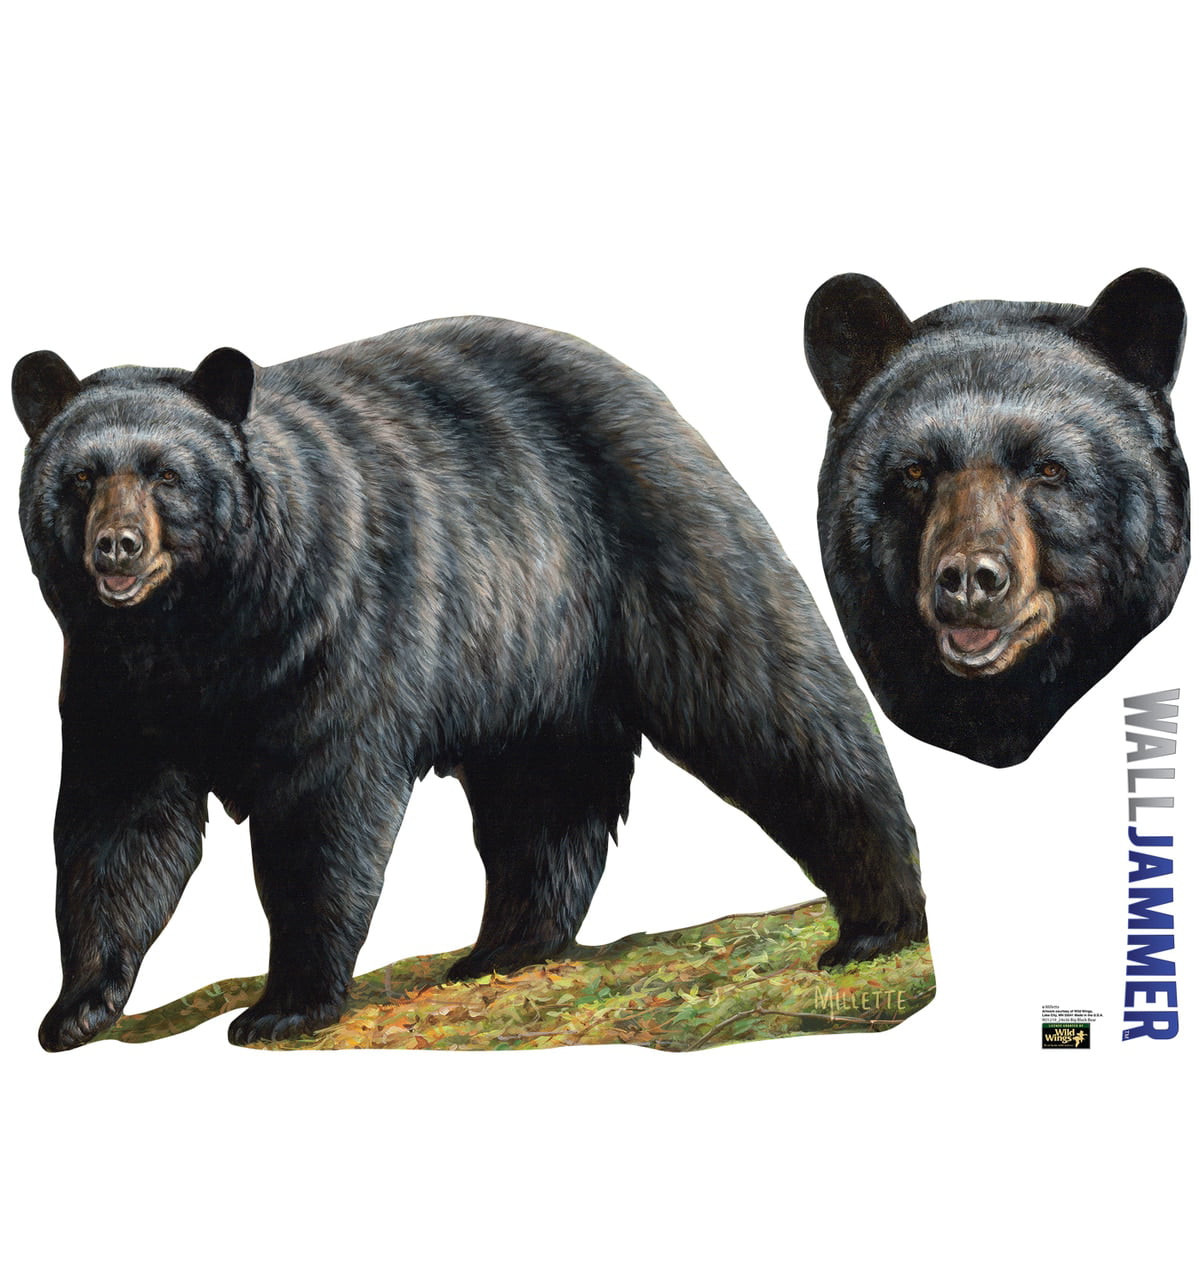 Picture of Advanced Graphics WJ1219 24 x 36 in. Big Black Bear Wall Decal